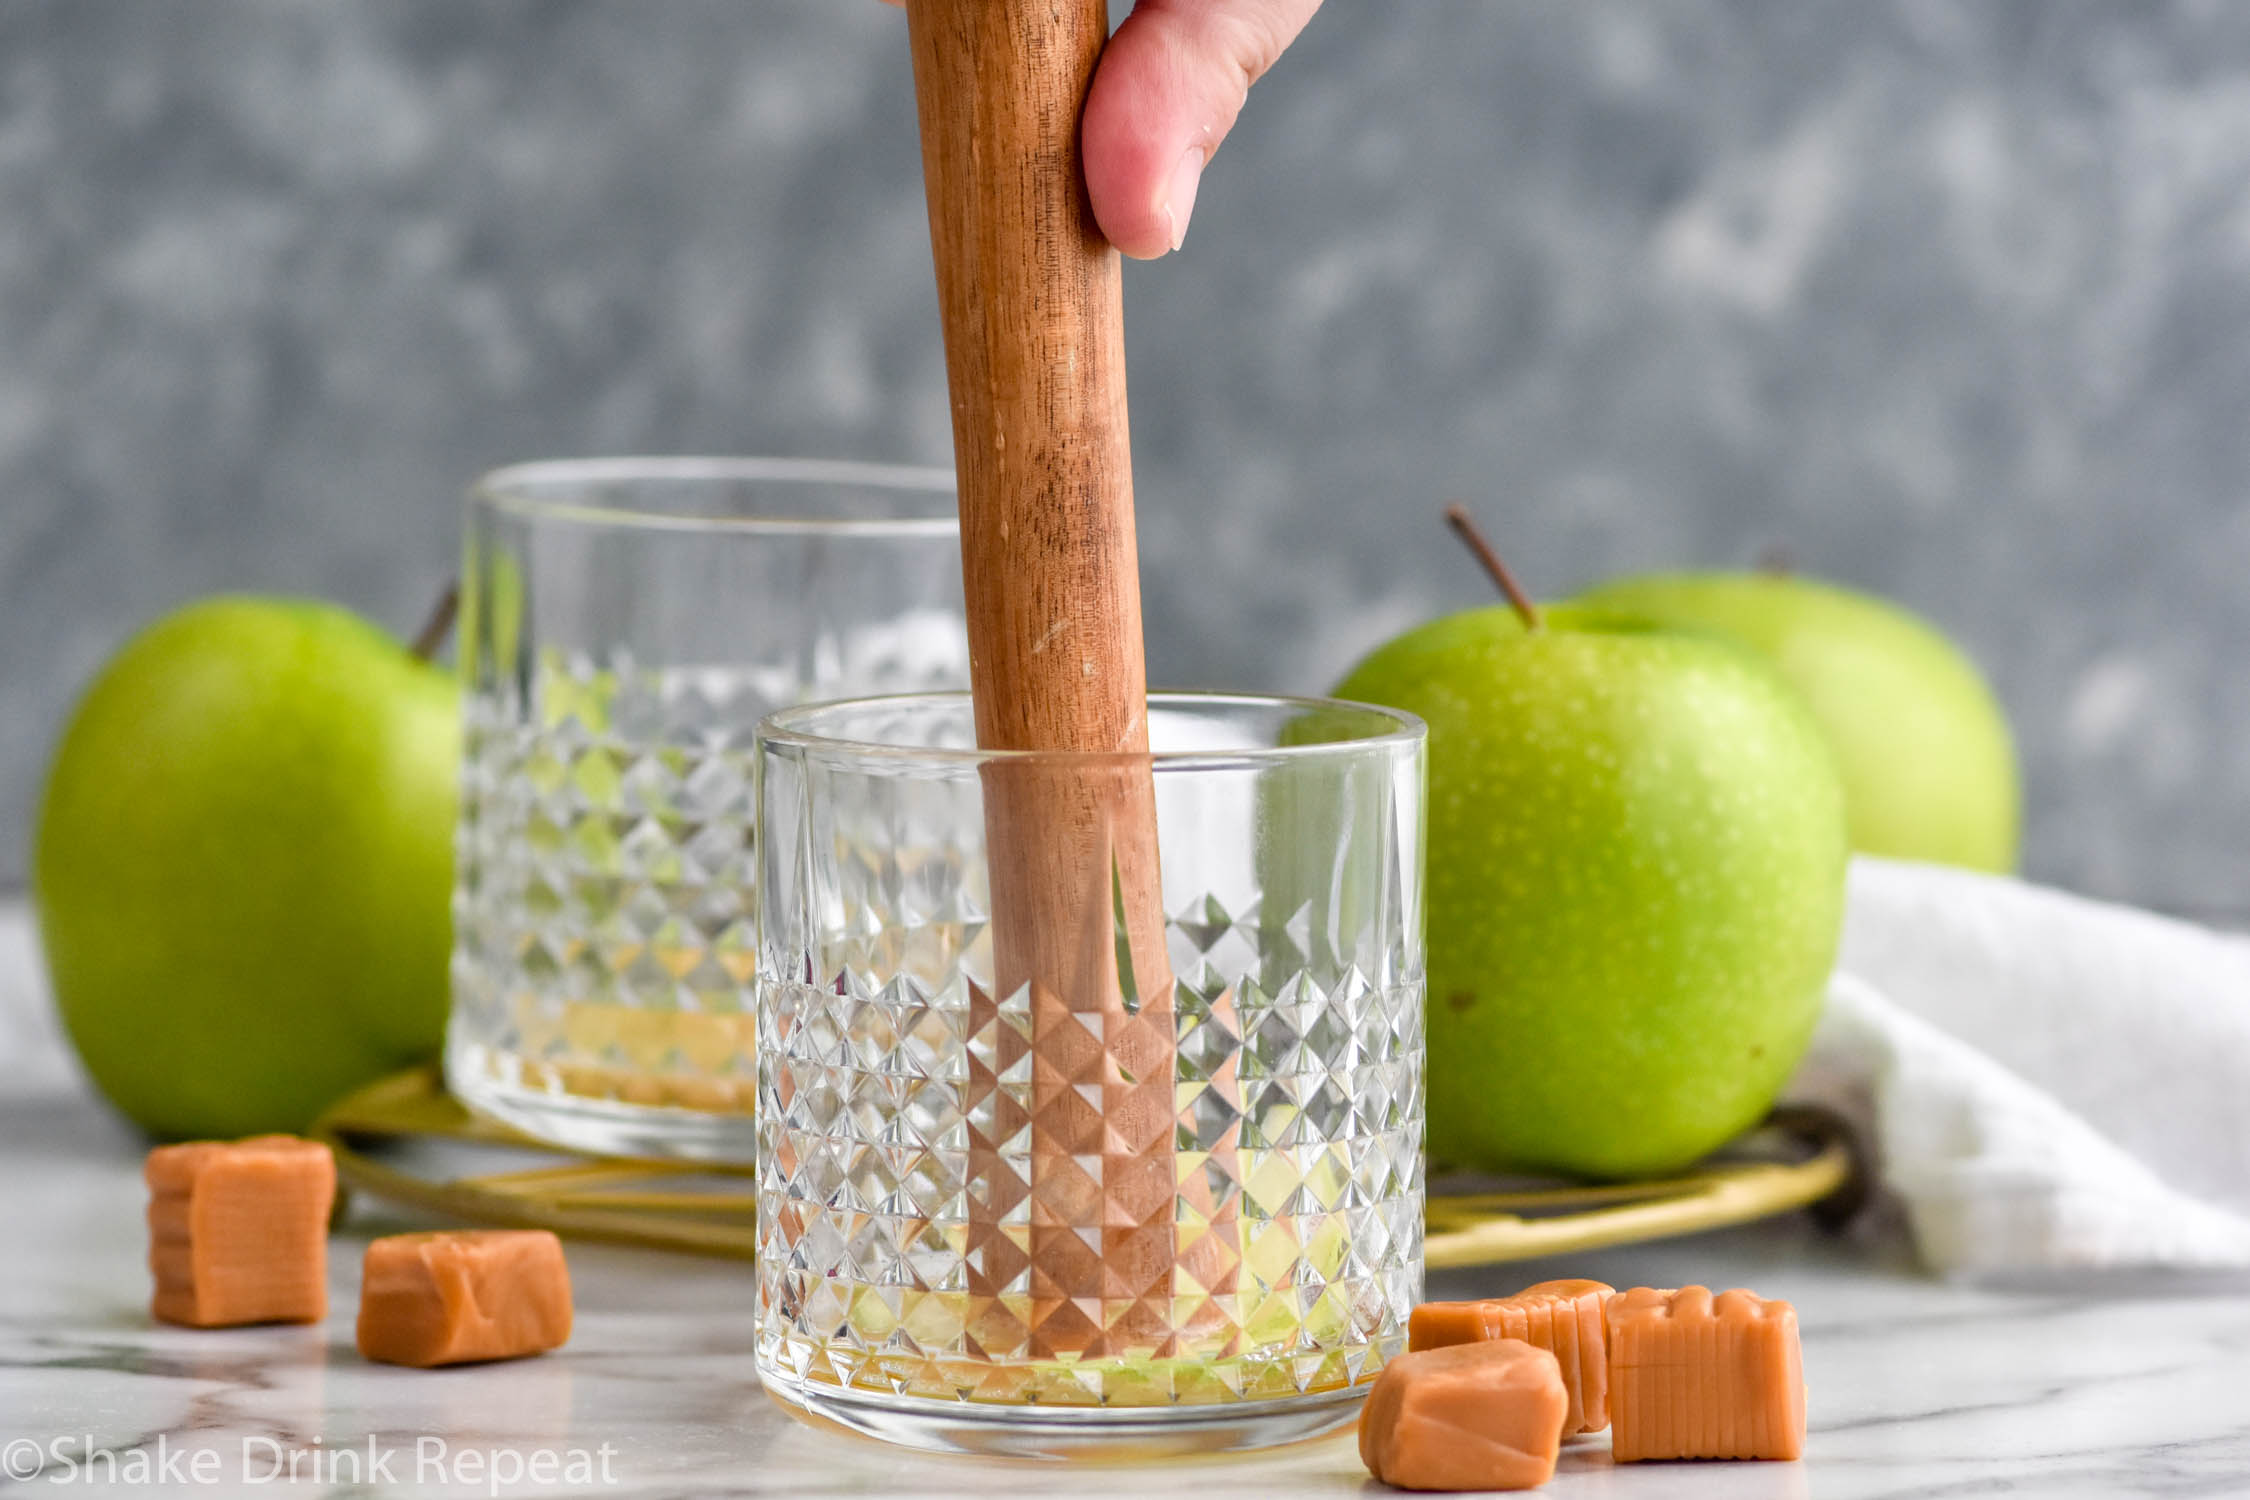 Side view of person's hand muddling ingredients for Caramel Apple Old Fashioned recipe. Apples and caramels beside glasses.